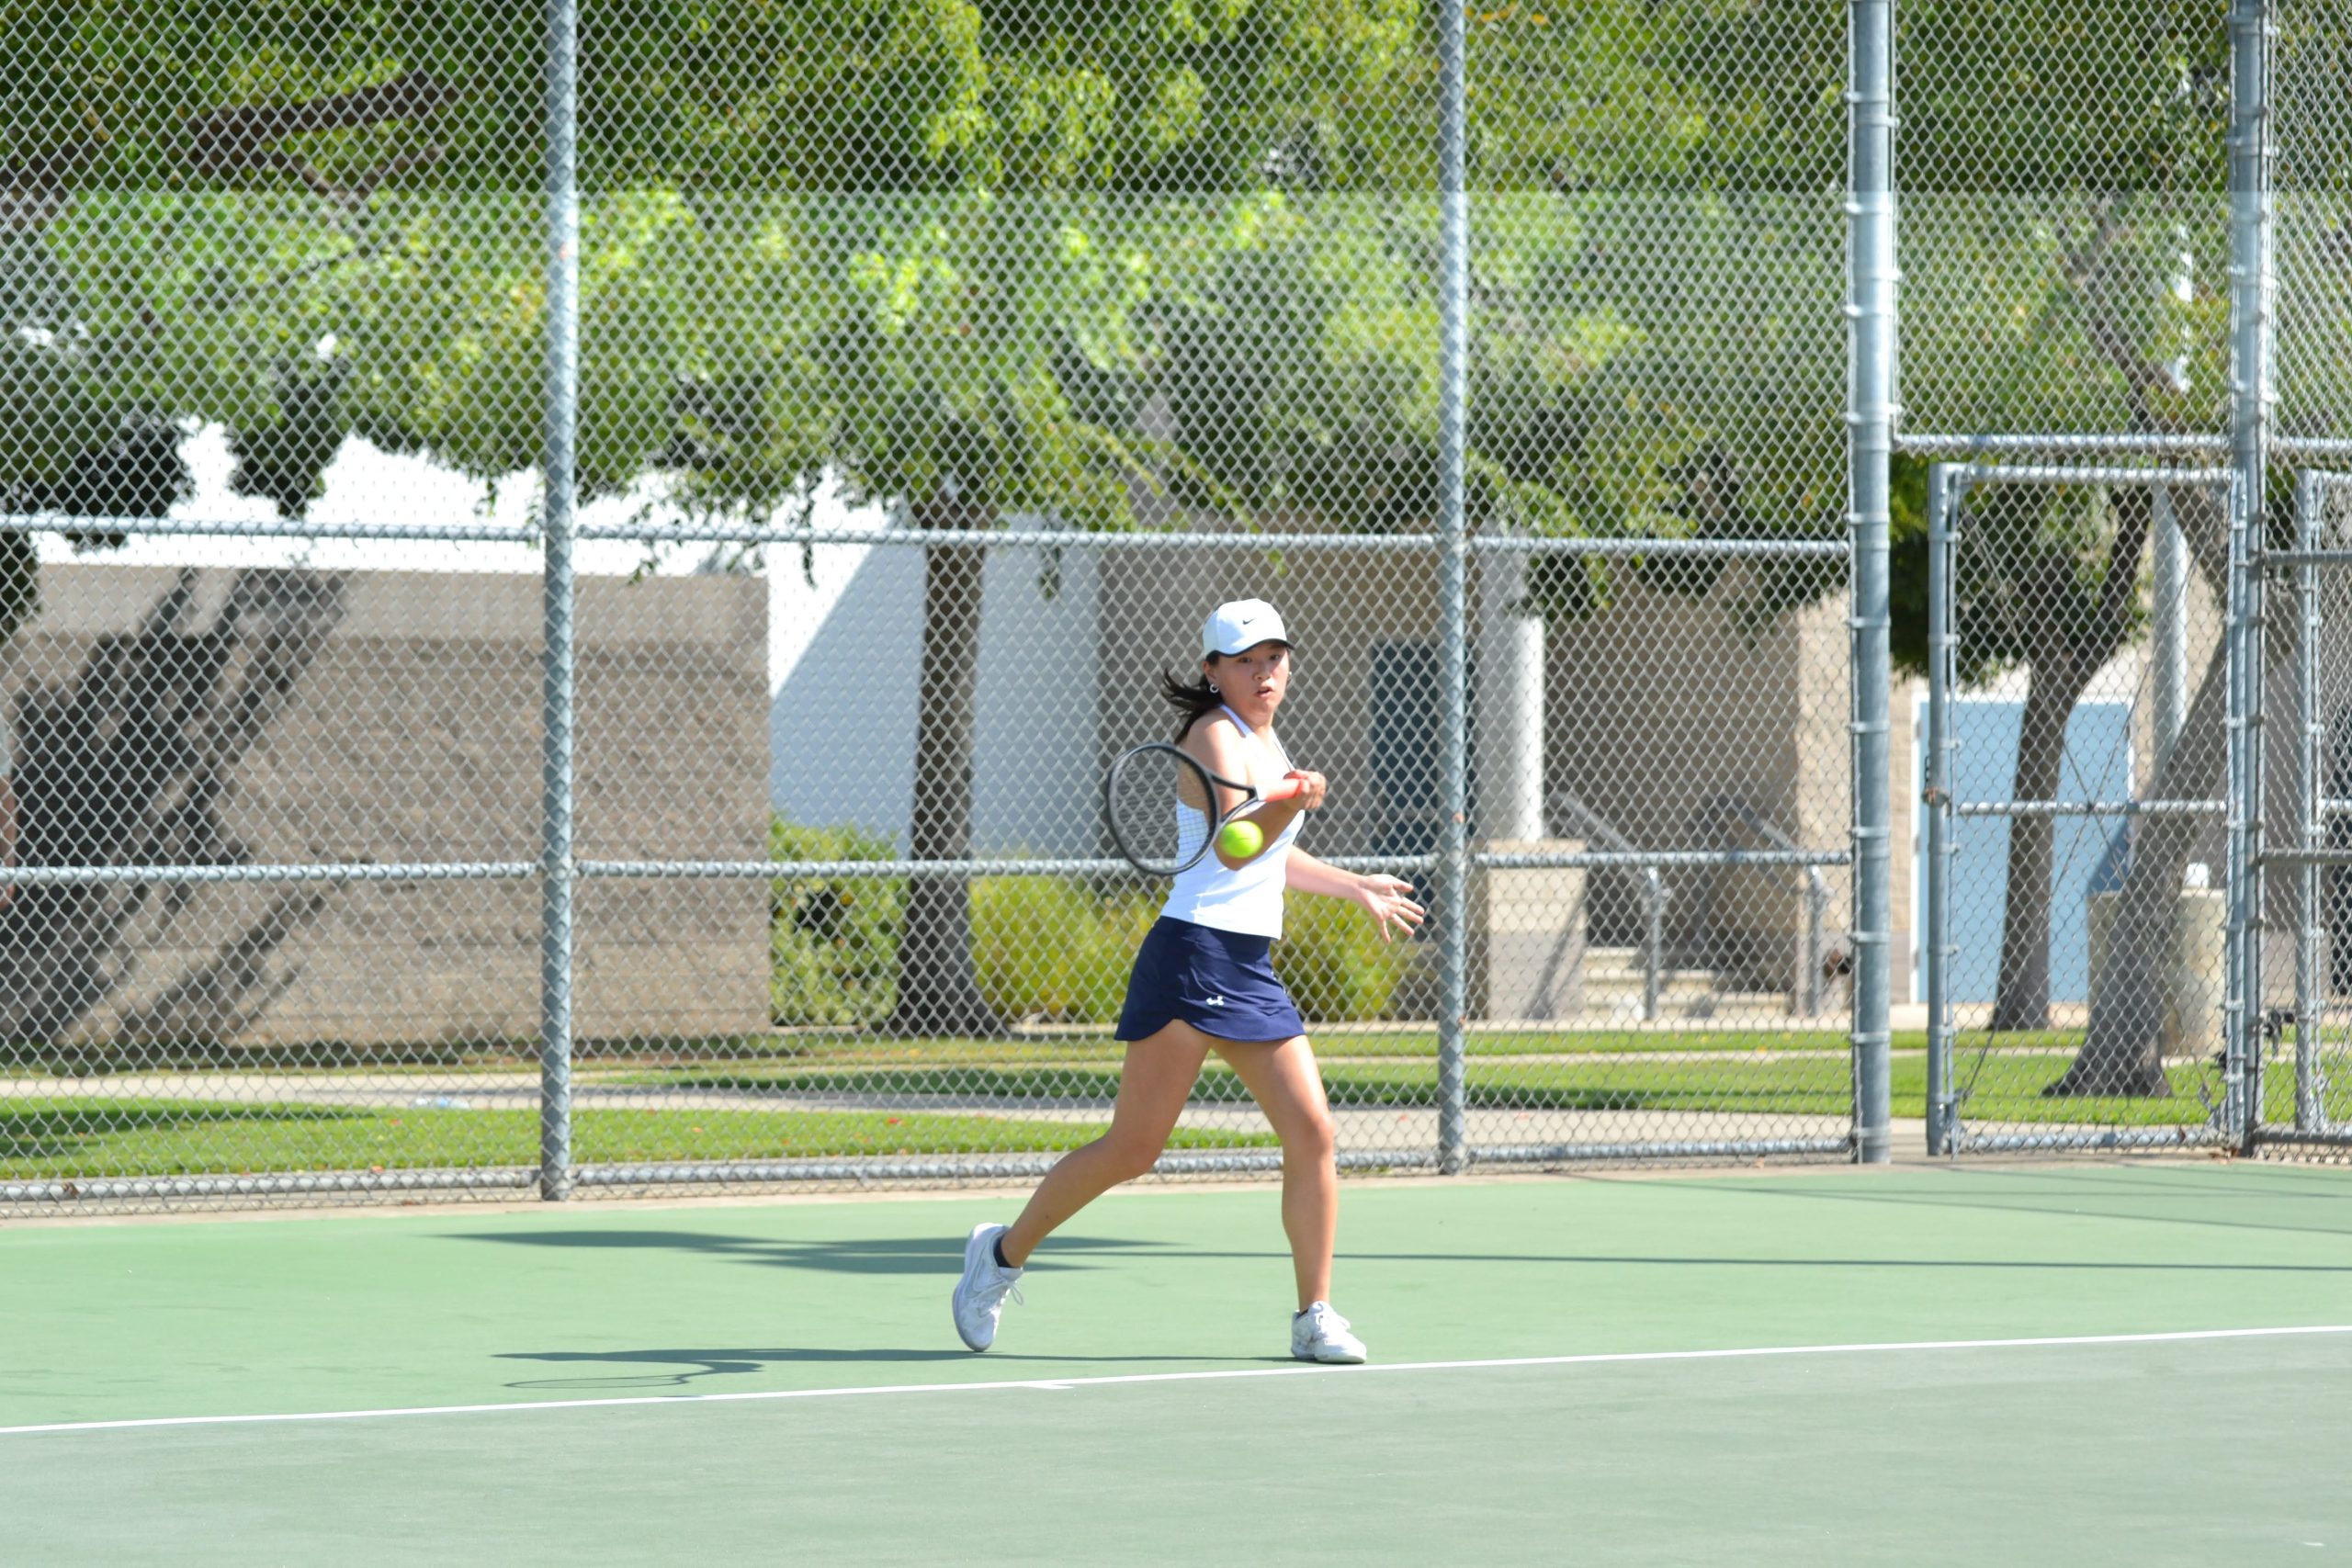 Varsity Tennis Co-Captain Tiana Pan ‘24 fights to win the point in her match.